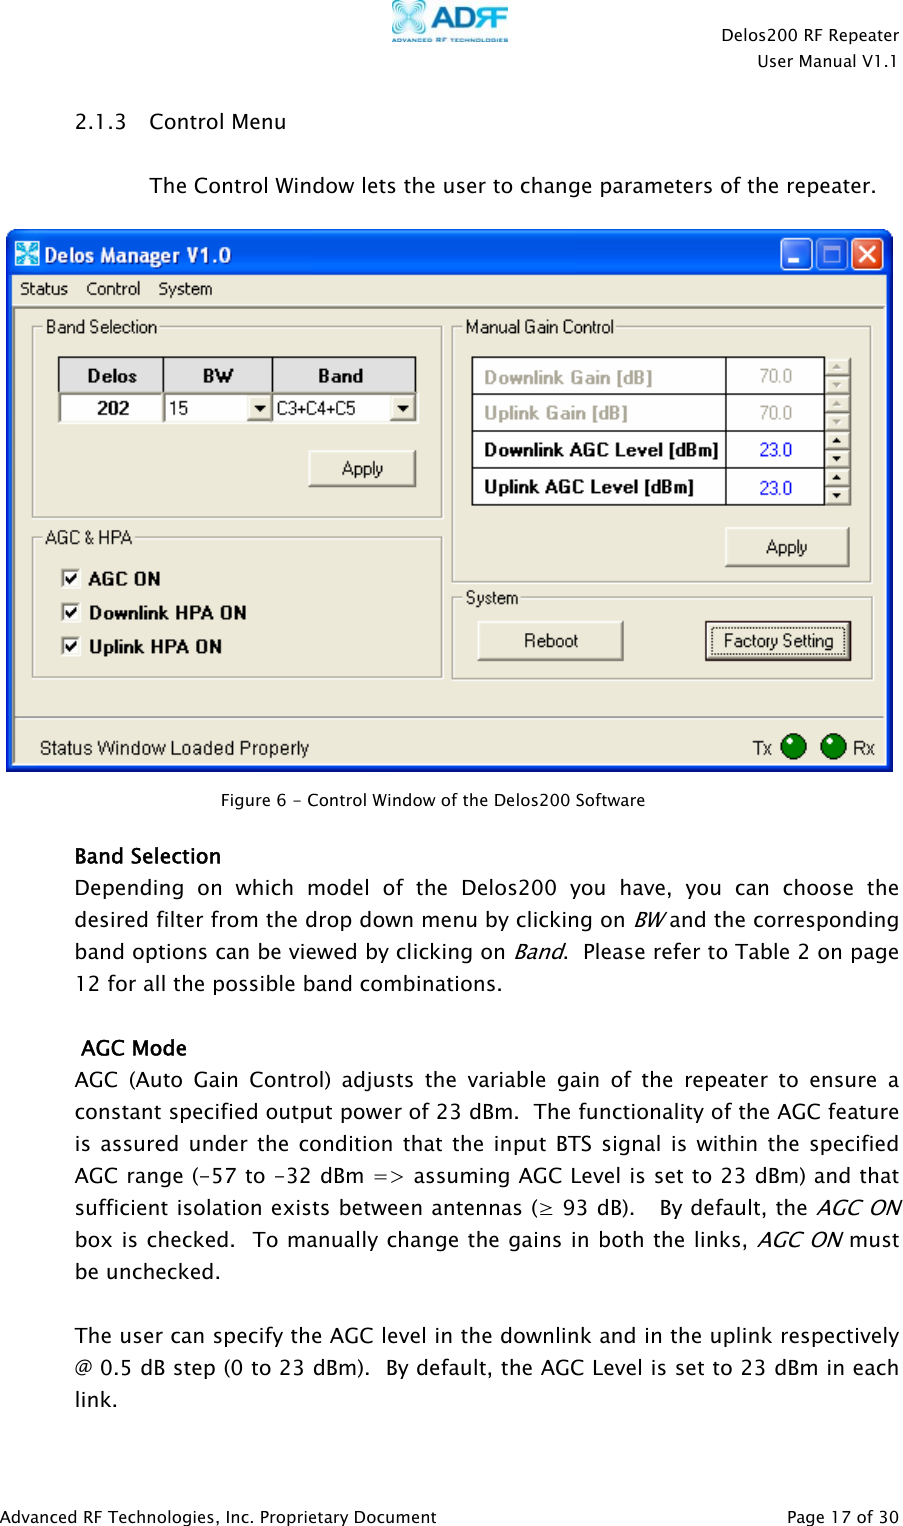    Delos200 RF Repeater  User Manual V1.1  Advanced RF Technologies, Inc. Proprietary Document   Page 17 of 30  2.1.3 Control Menu  The Control Window lets the user to change parameters of the repeater.     Band Selection Depending on which model of the Delos200 you have, you can choose the desired filter from the drop down menu by clicking on BW and the corresponding band options can be viewed by clicking on Band.  Please refer to Table 2 on page 12 for all the possible band combinations.   AGC Mode AGC (Auto Gain Control) adjusts the variable gain of the repeater to ensure a constant specified output power of 23 dBm.  The functionality of the AGC feature is assured under the condition that the input BTS signal is within the specified AGC range (-57 to -32 dBm =&gt; assuming AGC Level is set to 23 dBm) and that sufficient isolation exists between antennas (≥ 93 dB).   By default, the AGC ON box is checked.  To manually change the gains in both the links, AGC ON must be unchecked.    The user can specify the AGC level in the downlink and in the uplink respectively @ 0.5 dB step (0 to 23 dBm).  By default, the AGC Level is set to 23 dBm in each link.    Figure 6 - Control Window of the Delos200 Software  